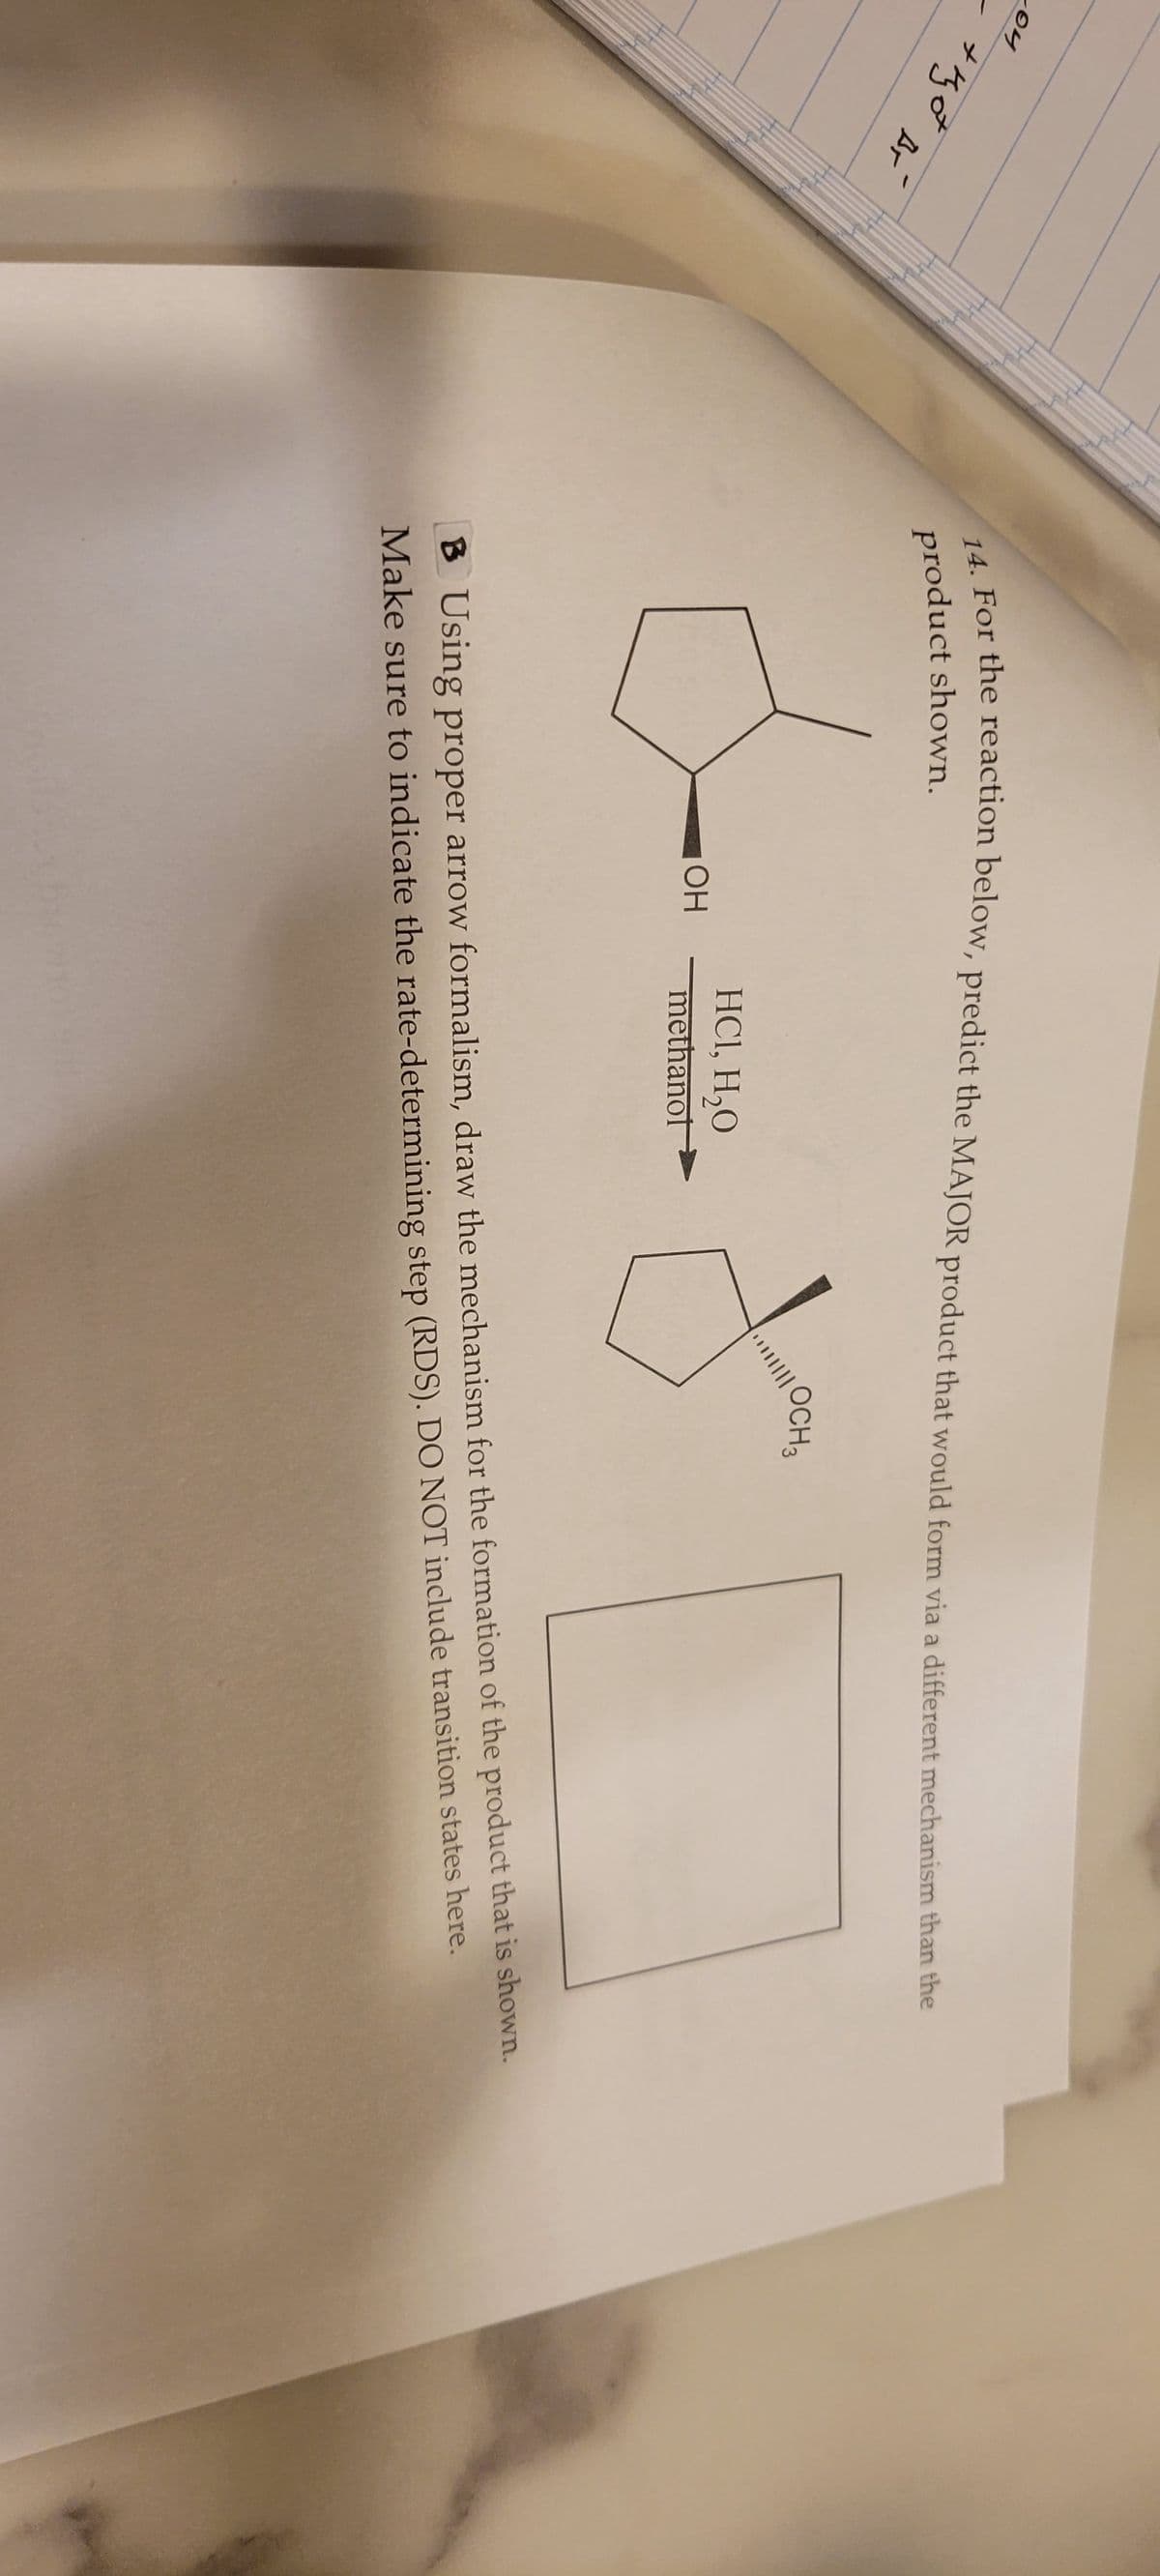 204
+got Br
14. For the reaction below, predict the MAJOR product that would form via a different mechanism than the
product shown.
OH
HC1, H₂O
methanol
OCH 3
B Using proper arrow formalism, draw the mechanism for the formation of the product that is shown.
Make sure to indicate the rate-determining step (RDS). DO NOT include transition states here.